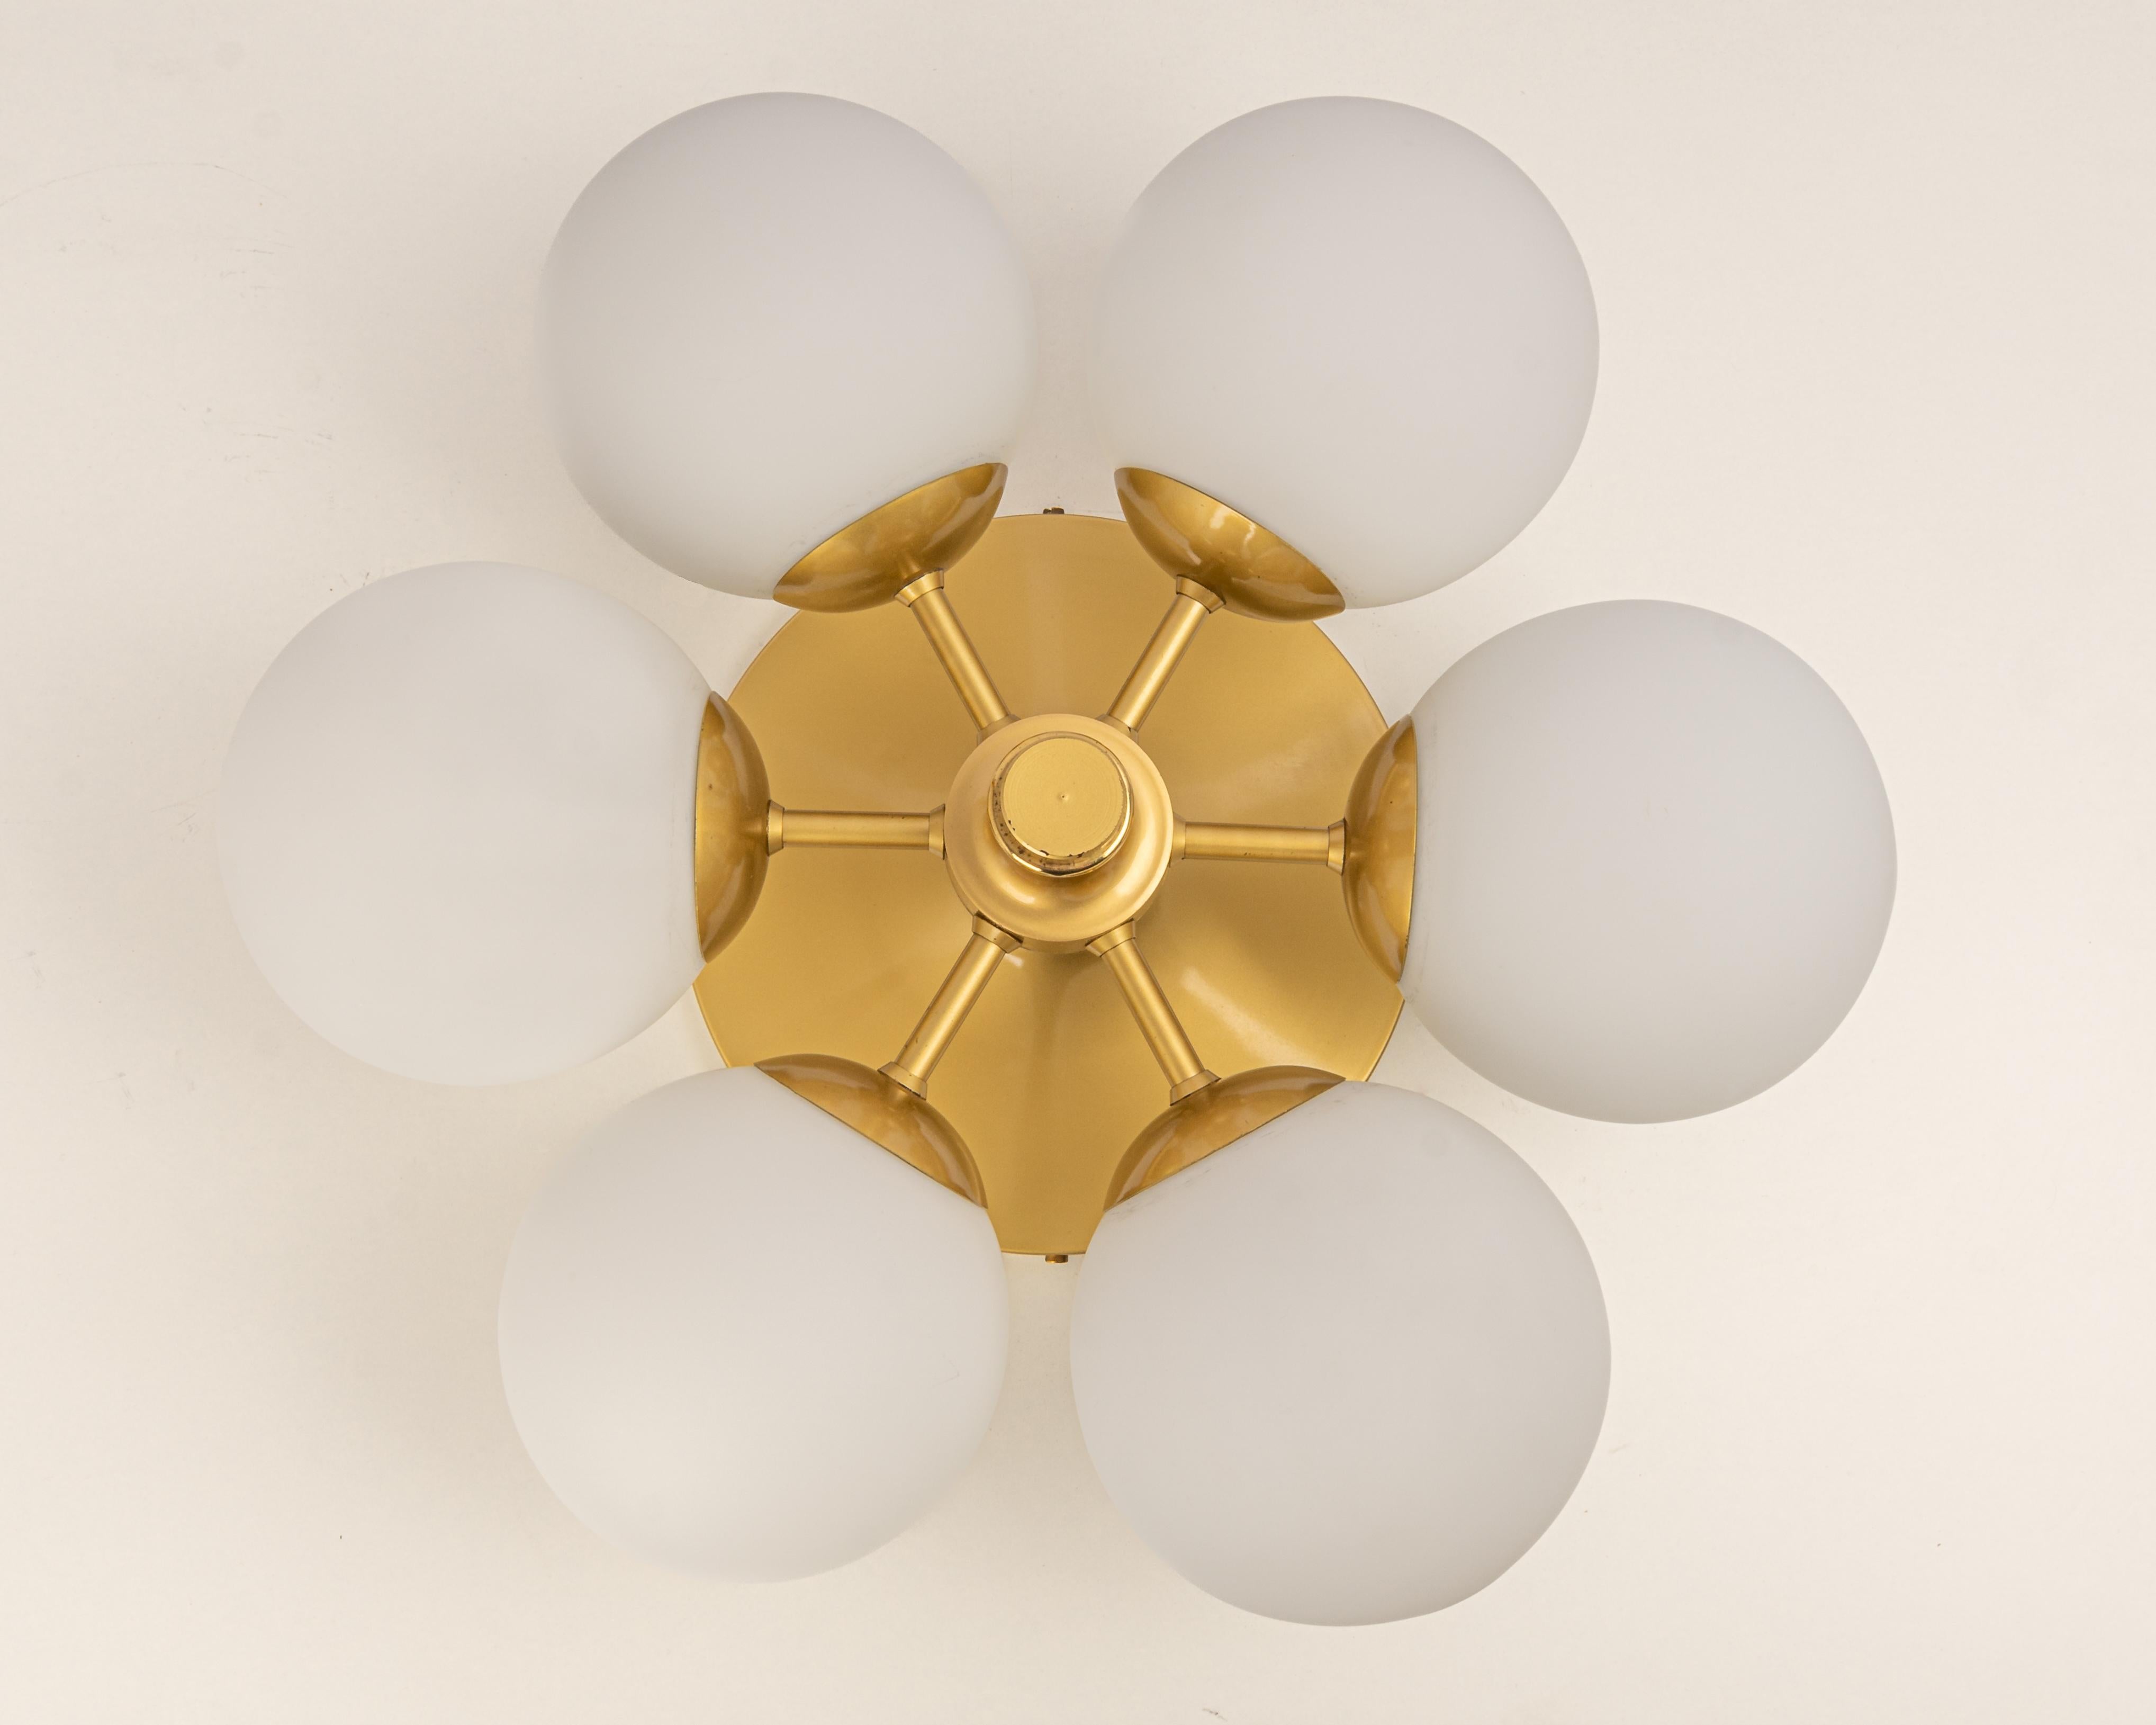 Stunning radial Sputnik brass color chandelier with six opal glass globes by Kaiser Leuchten, Germany, 1960s.

High quality and in very good condition. Cleaned, well-wired and ready to use. 

The fixture requires 6 x E14 standard bulbs with 40W